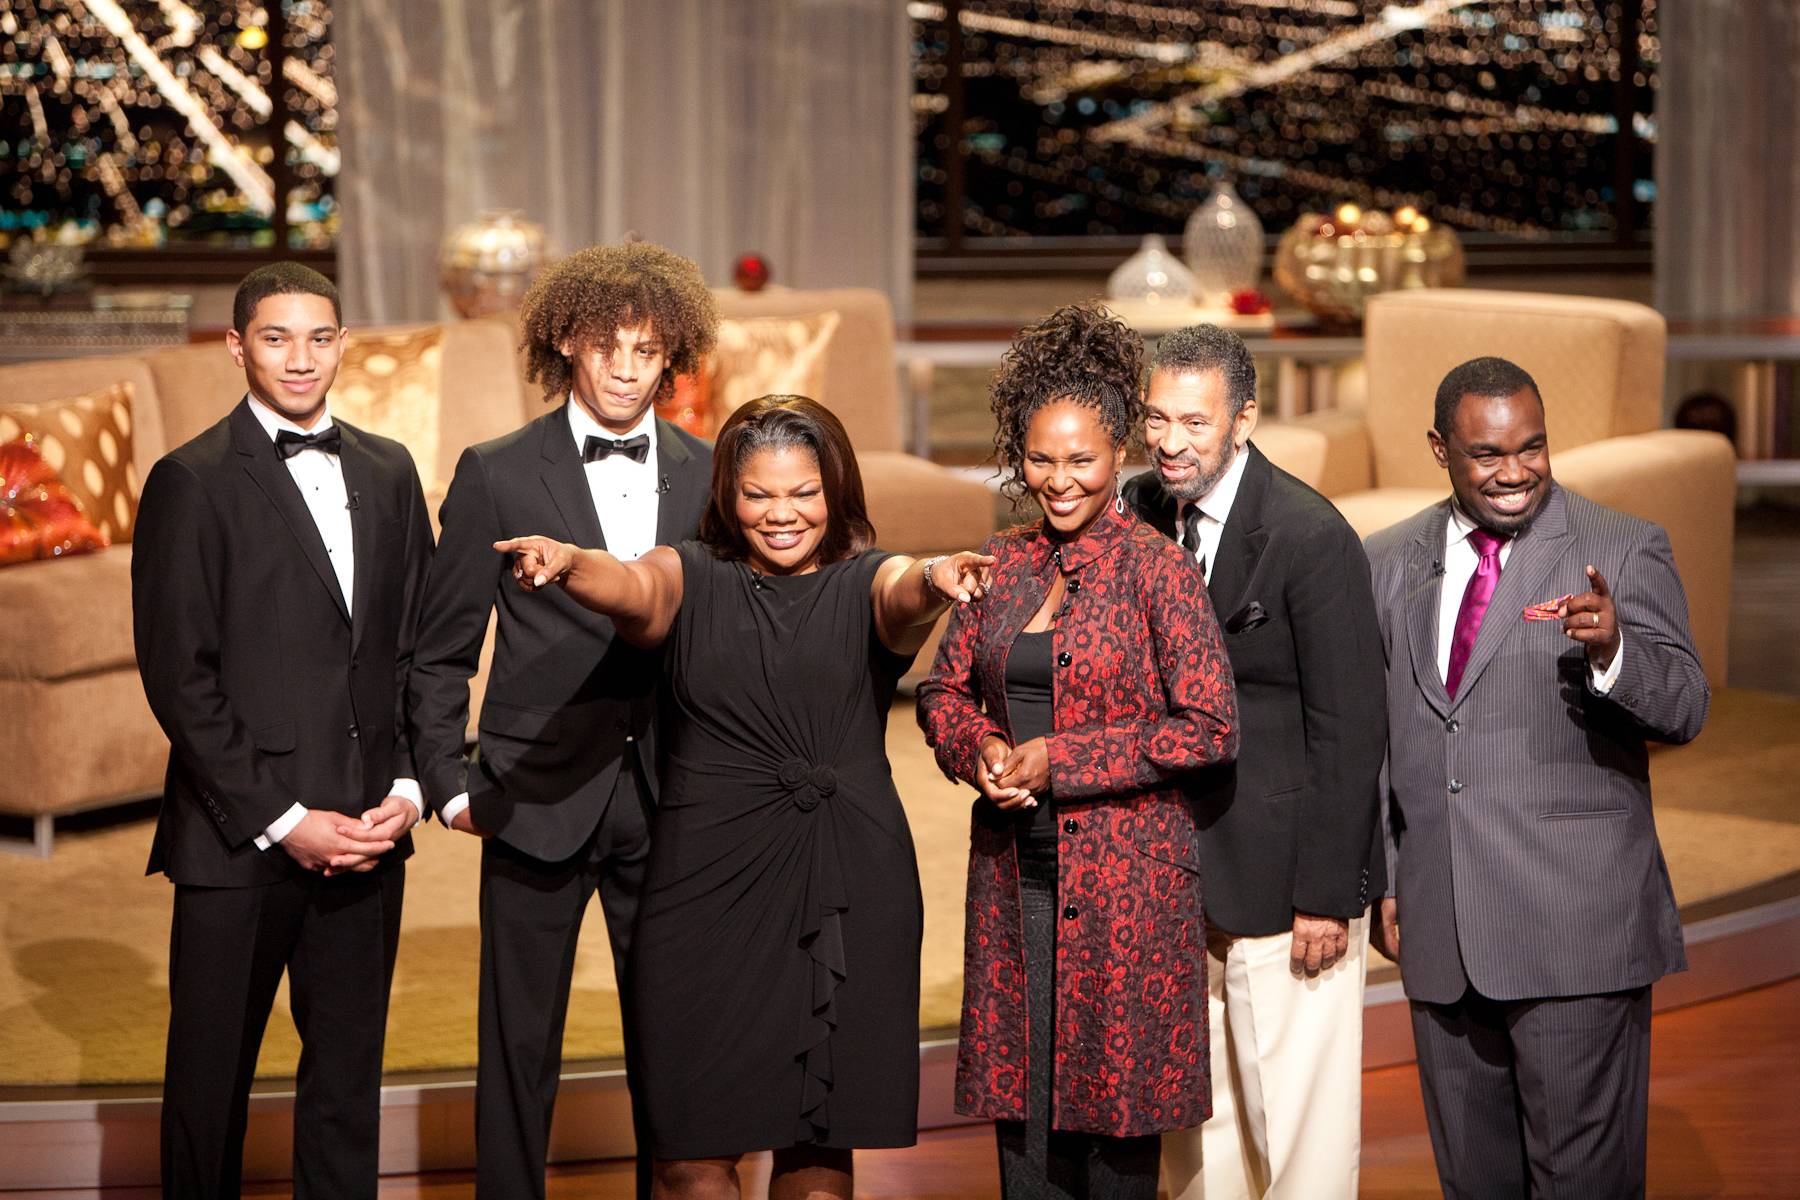 Farewell to Another Great Episode! - From left: The Manzari Brothers, Mo'Nique, Suzzanne Douglas, Maurice Hines and Rodney Perry. (Photo: Darnell Williams/BET)